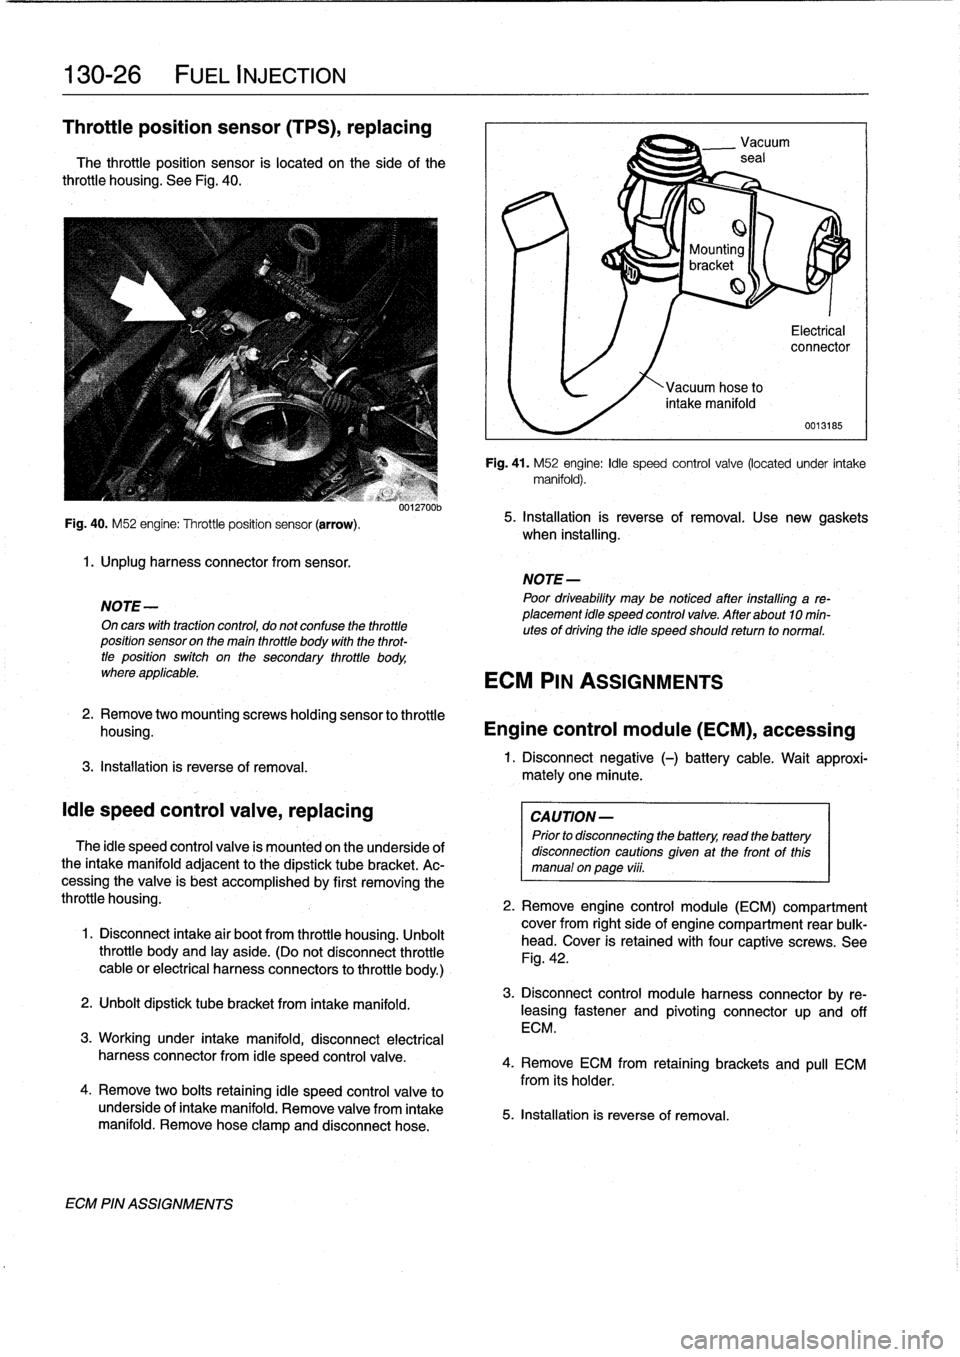 BMW 318i 1992 E36 Workshop Manual 
130-26

	

FUEL
INJECTION

Throttle
position
sensor
(TPS),
replacing

The
throttie
position
sensor
is
located
on
the
side
of
the
throttie
housing
.
See
Fig
.
40
.

Fig
.
40
.
M52
engine
:
Throttle
po